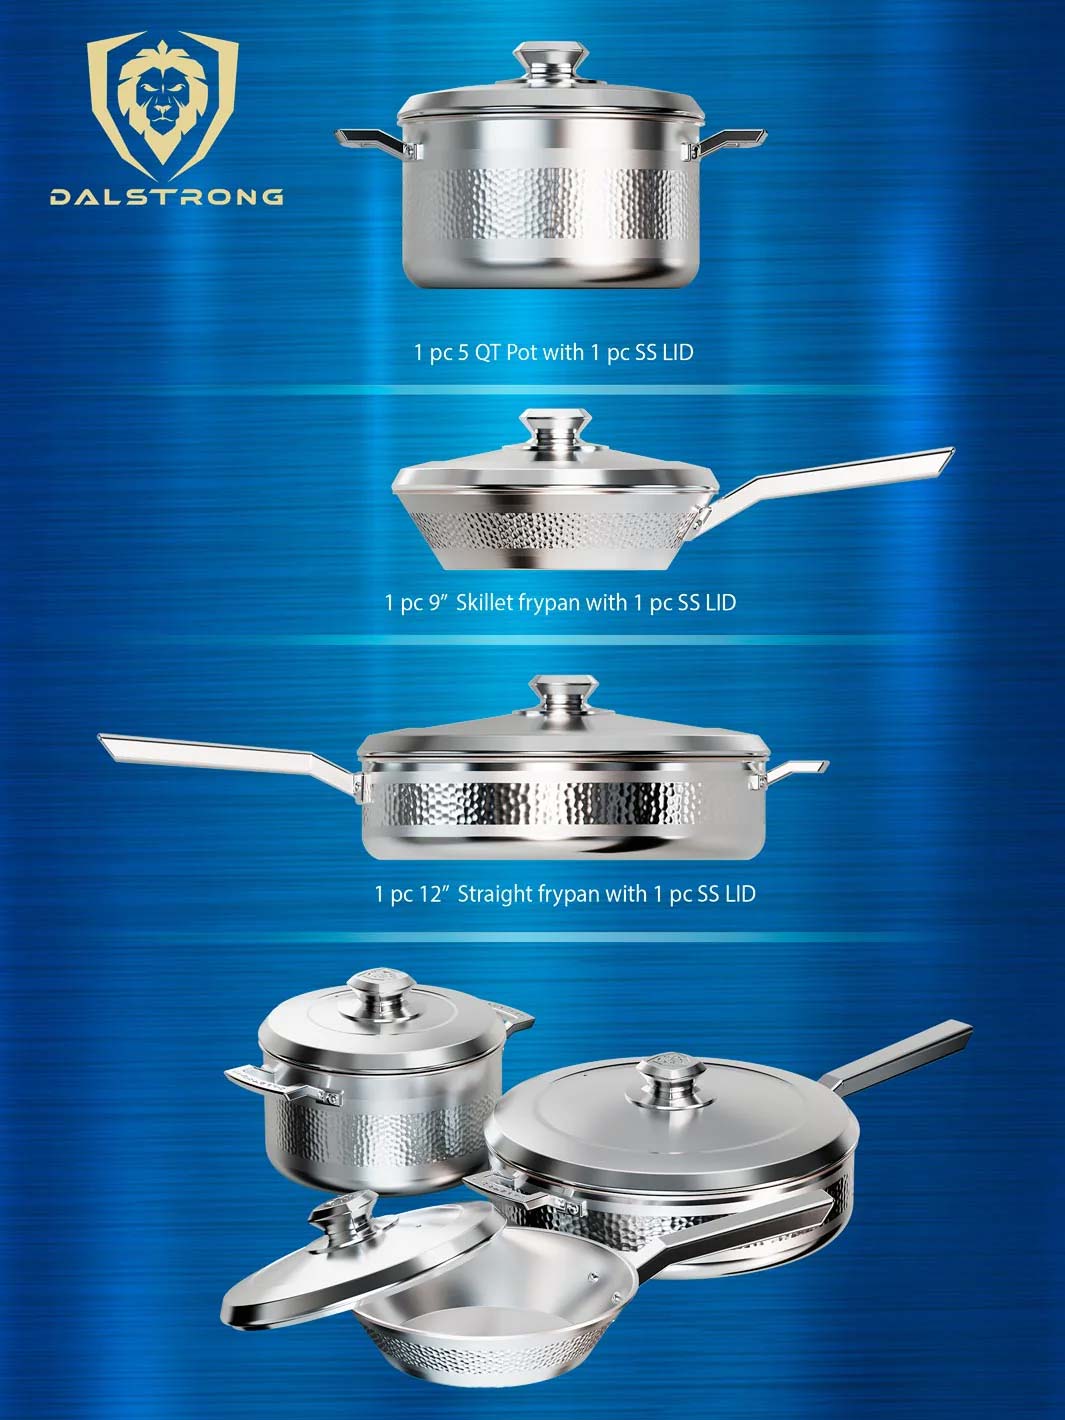 Dalstrong avalon series 6 piece cookware set silver featuring it's complete set of cookwares.